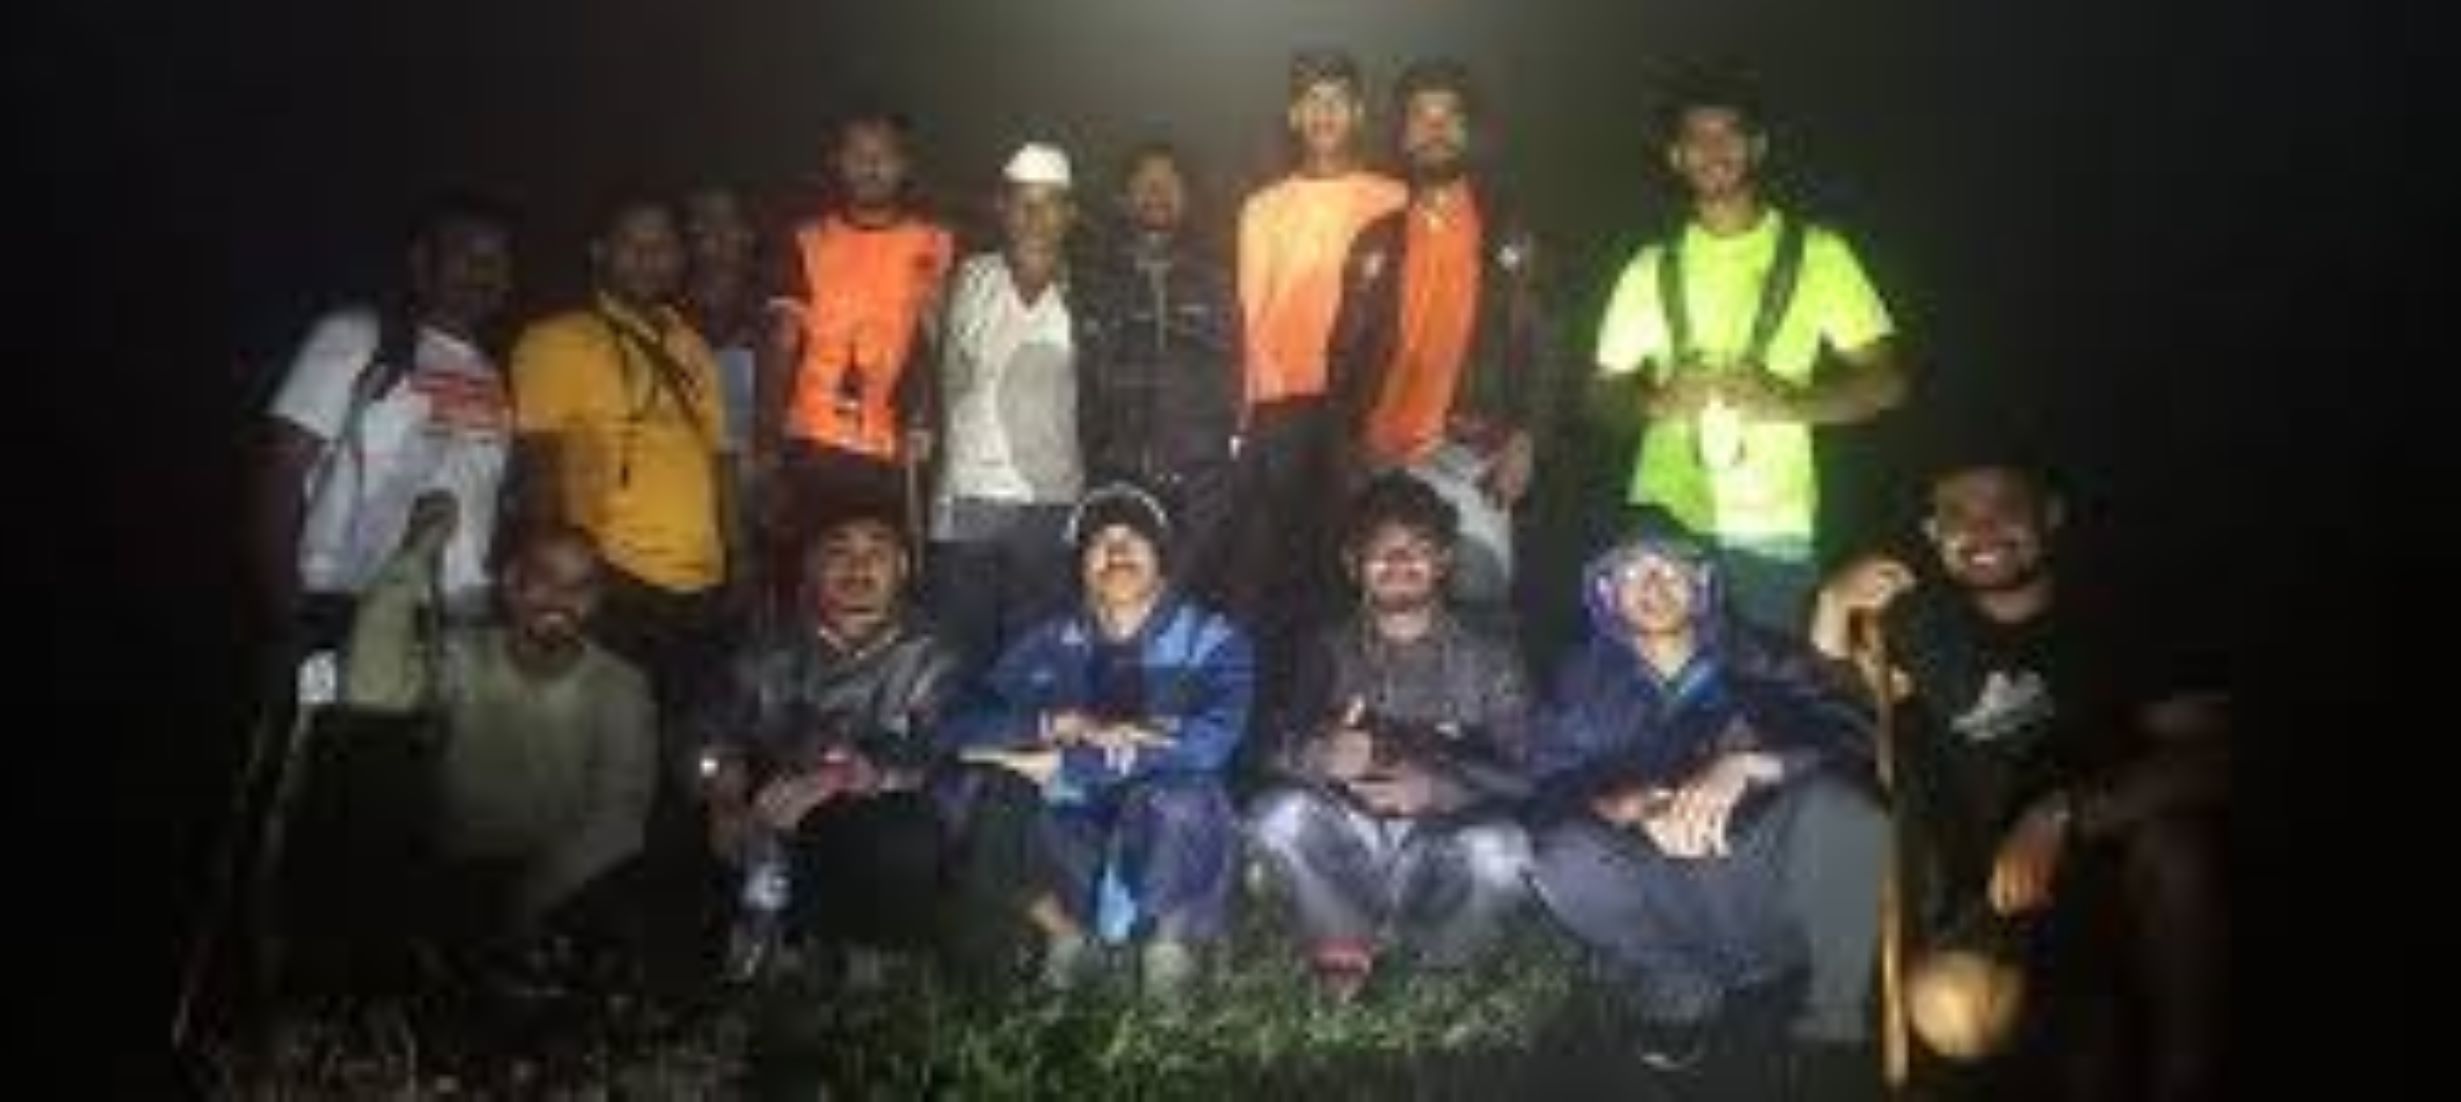 180 Stranded University Students Rescued From Hiking Destination In Sri Lanka